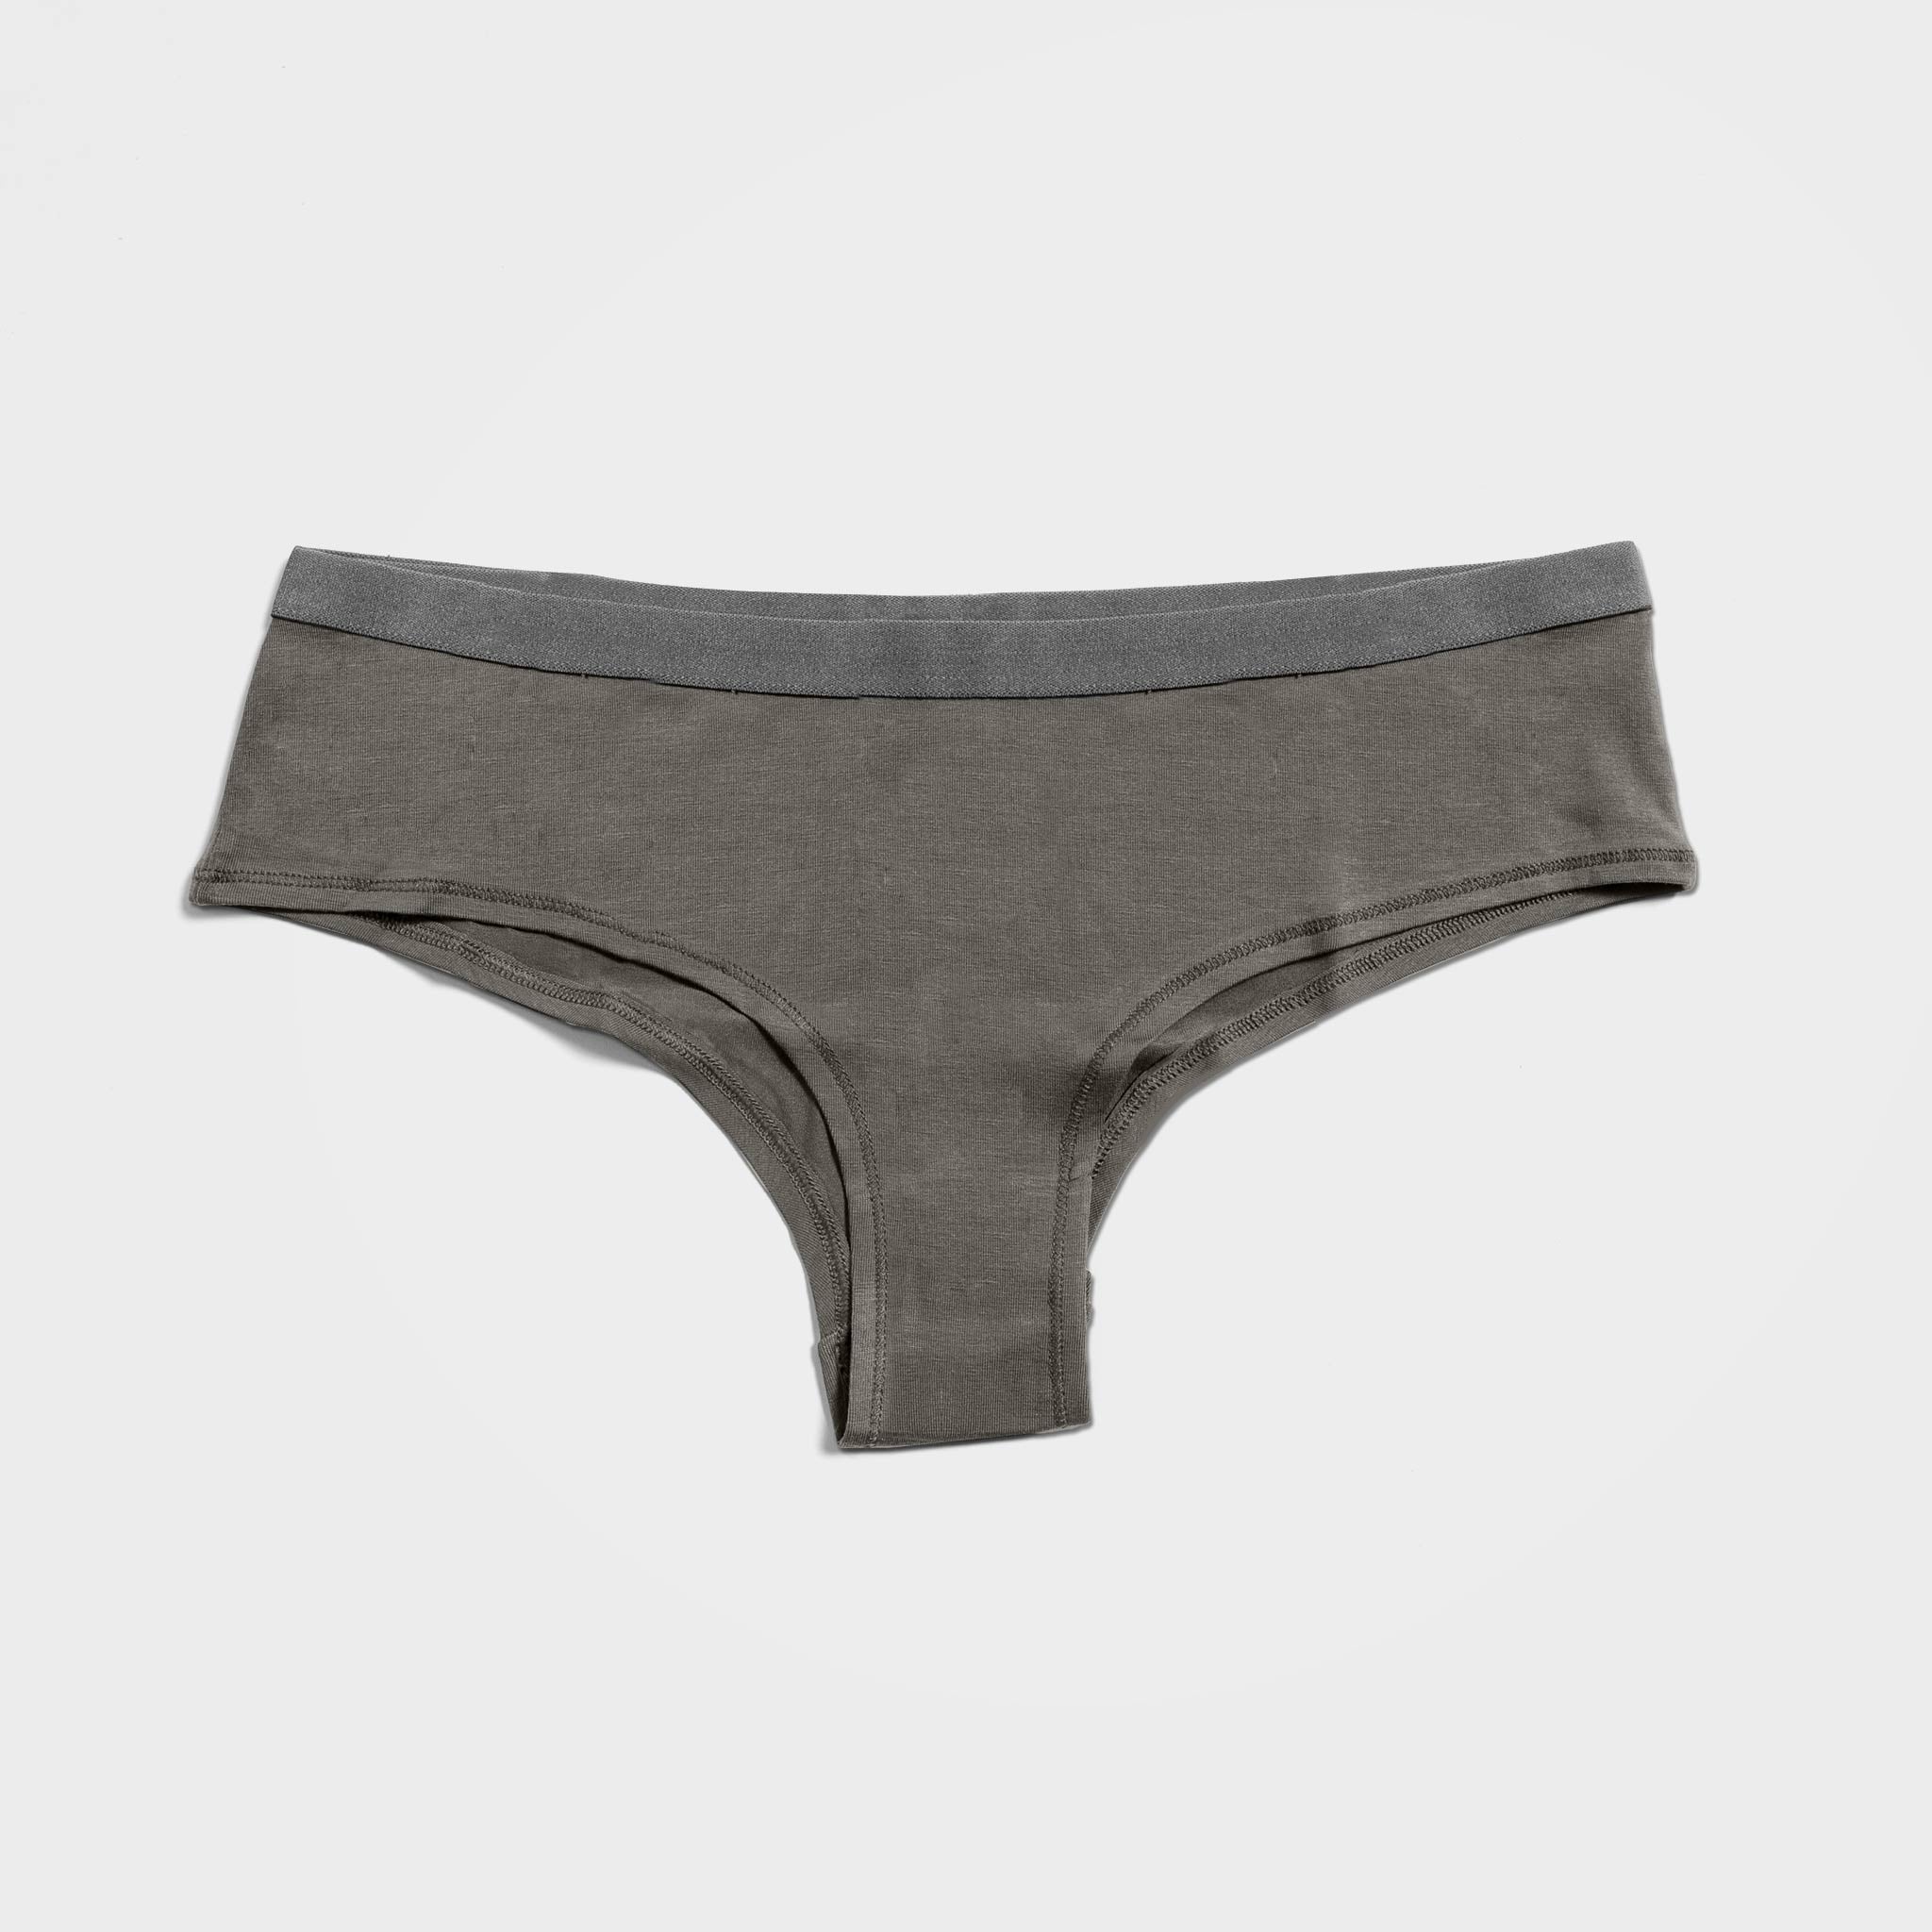 Postpartum Delivery Underwear - 3 Pack Hipsters in Black by The Mad Love Co.